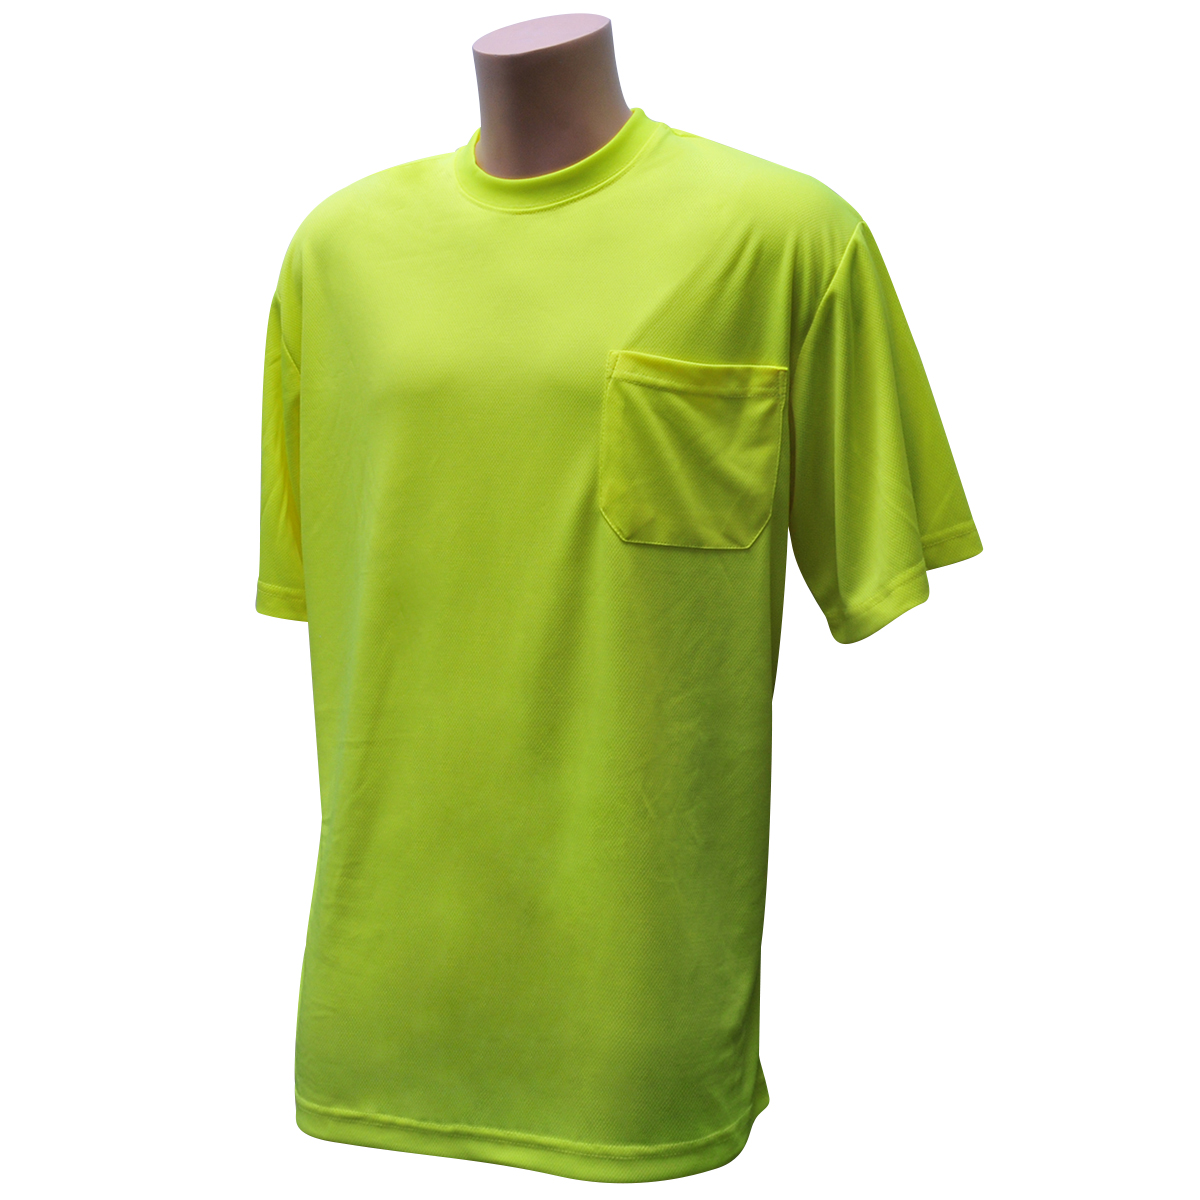 BlackCanyon Outfitters Non Rated Short Sleeve Pocket T-Shirt Lime Green BCOSSTY2X Brightly Colored Shirt Fast-Dry Fabric 2X